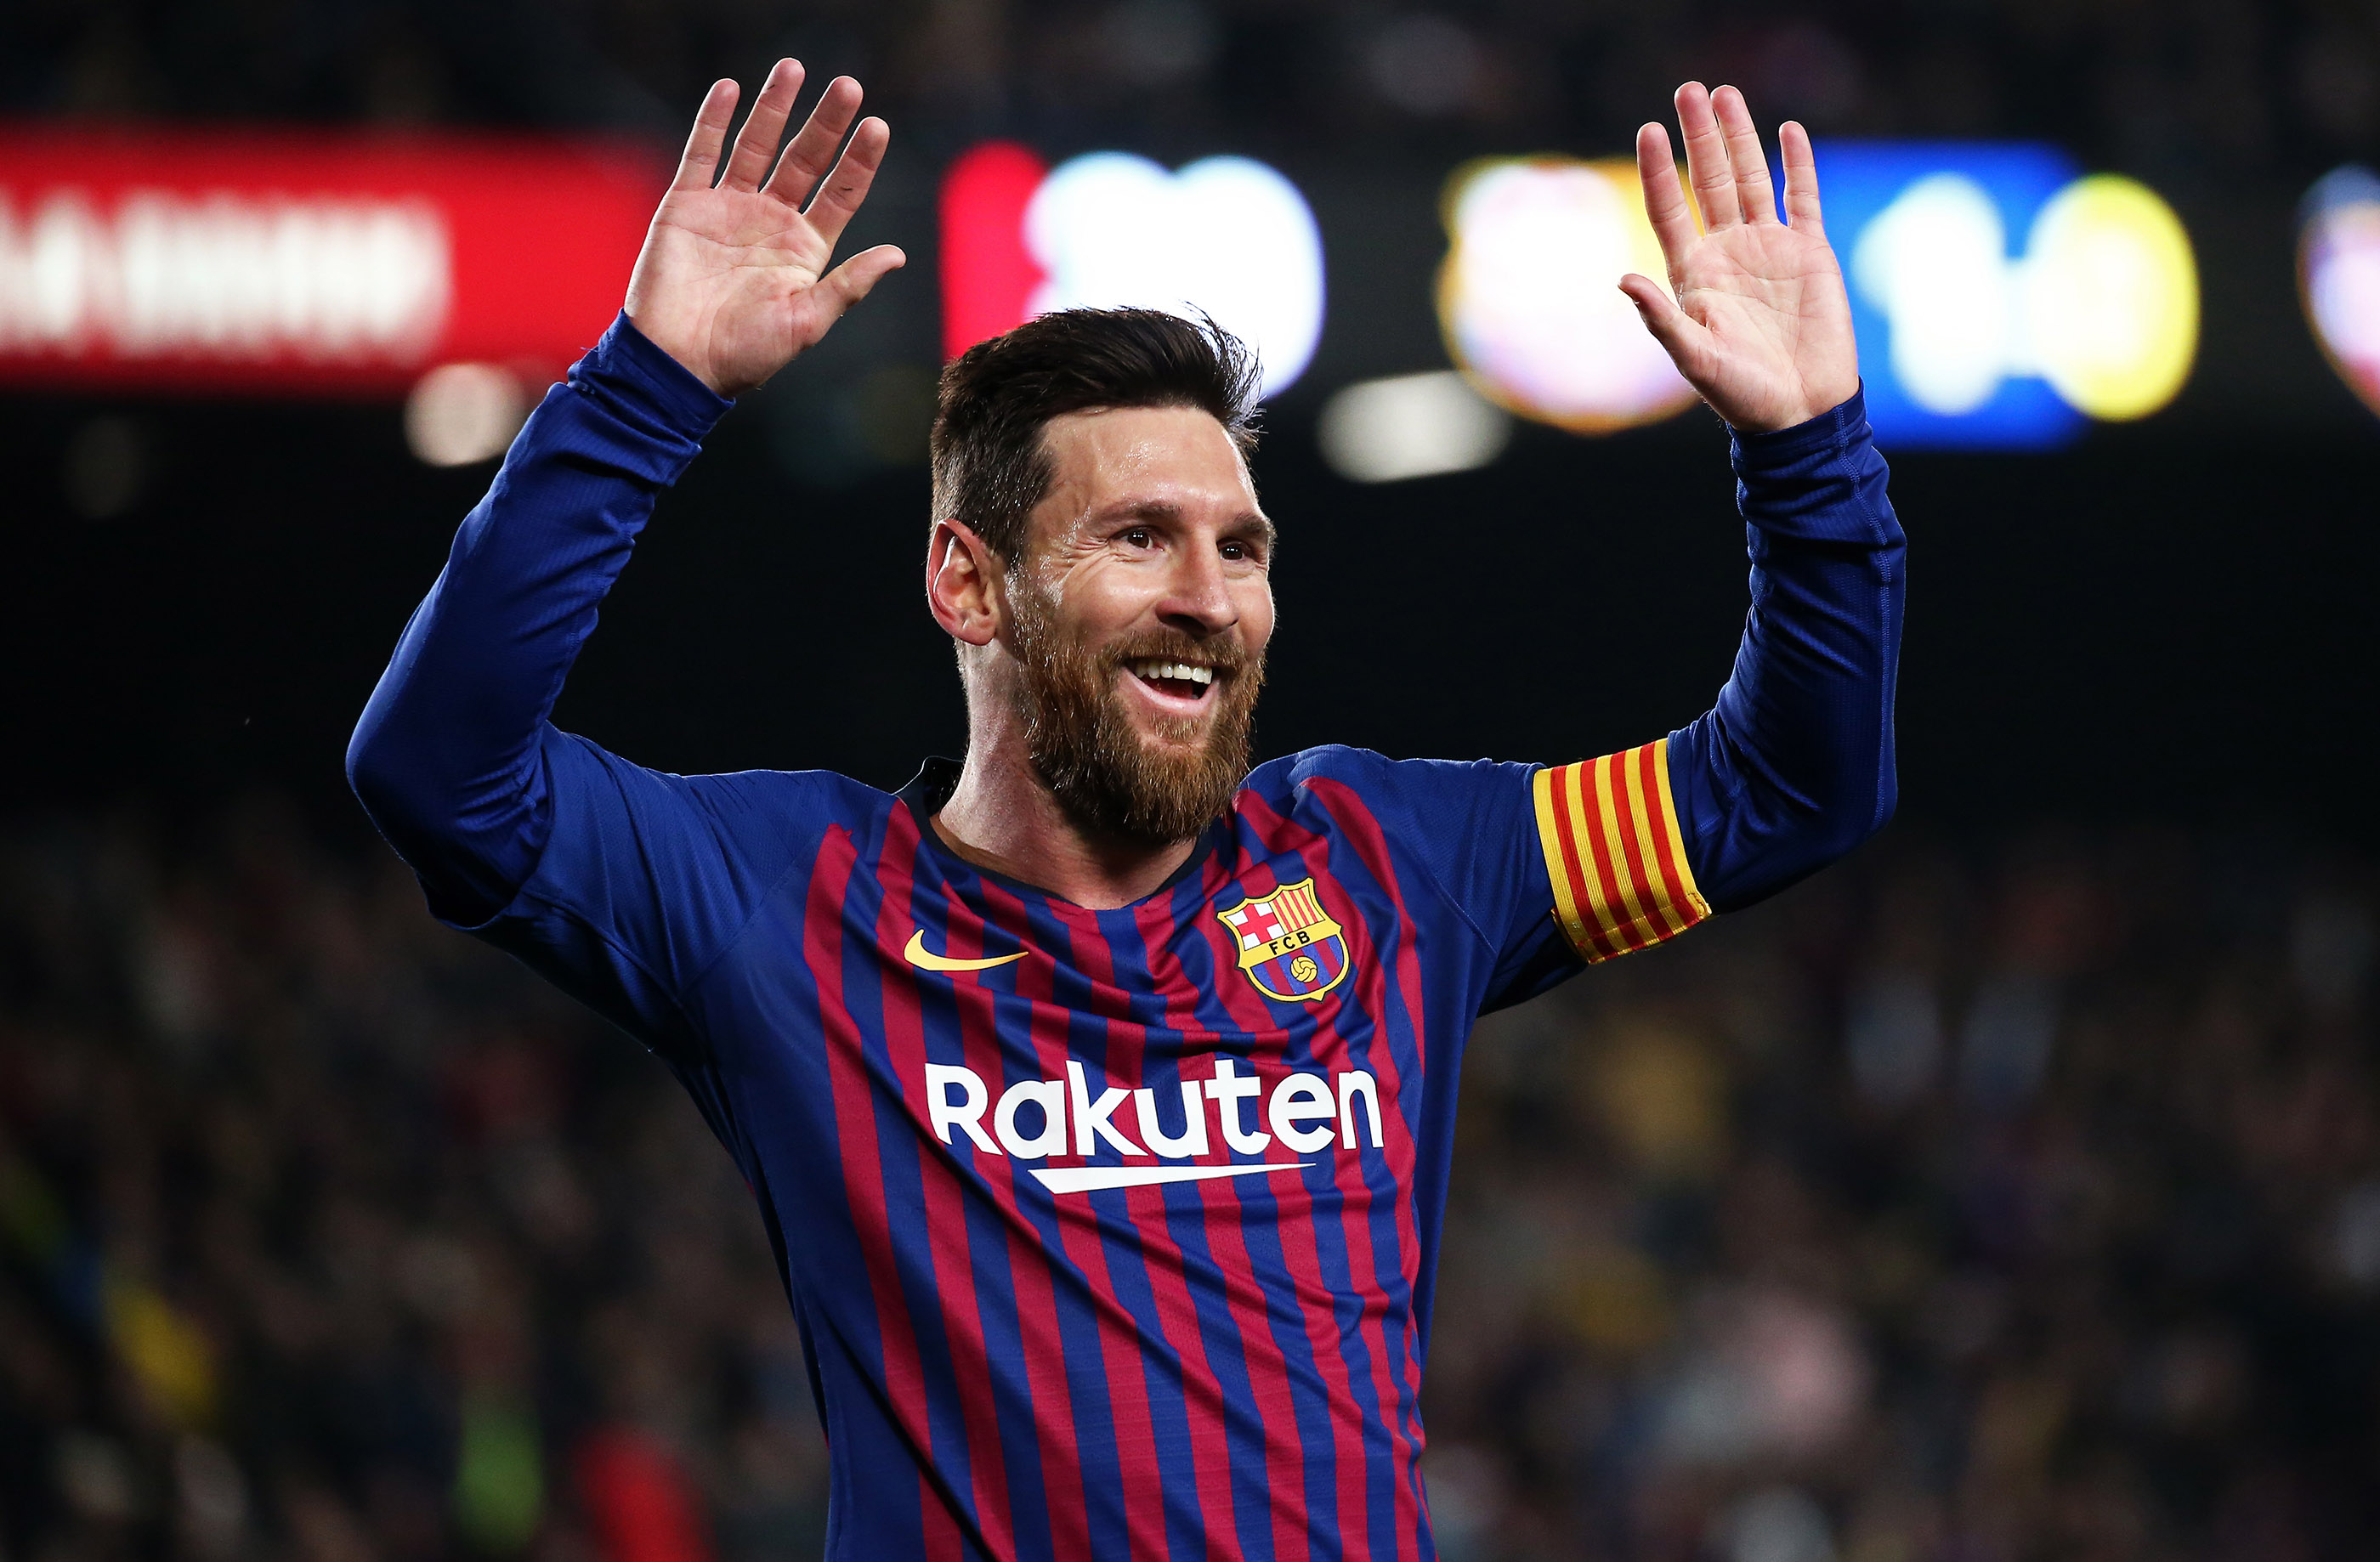 'I'm 69 and I've seen many players, but Messi is something else', says former Real Madrid boss - Bóng Đá